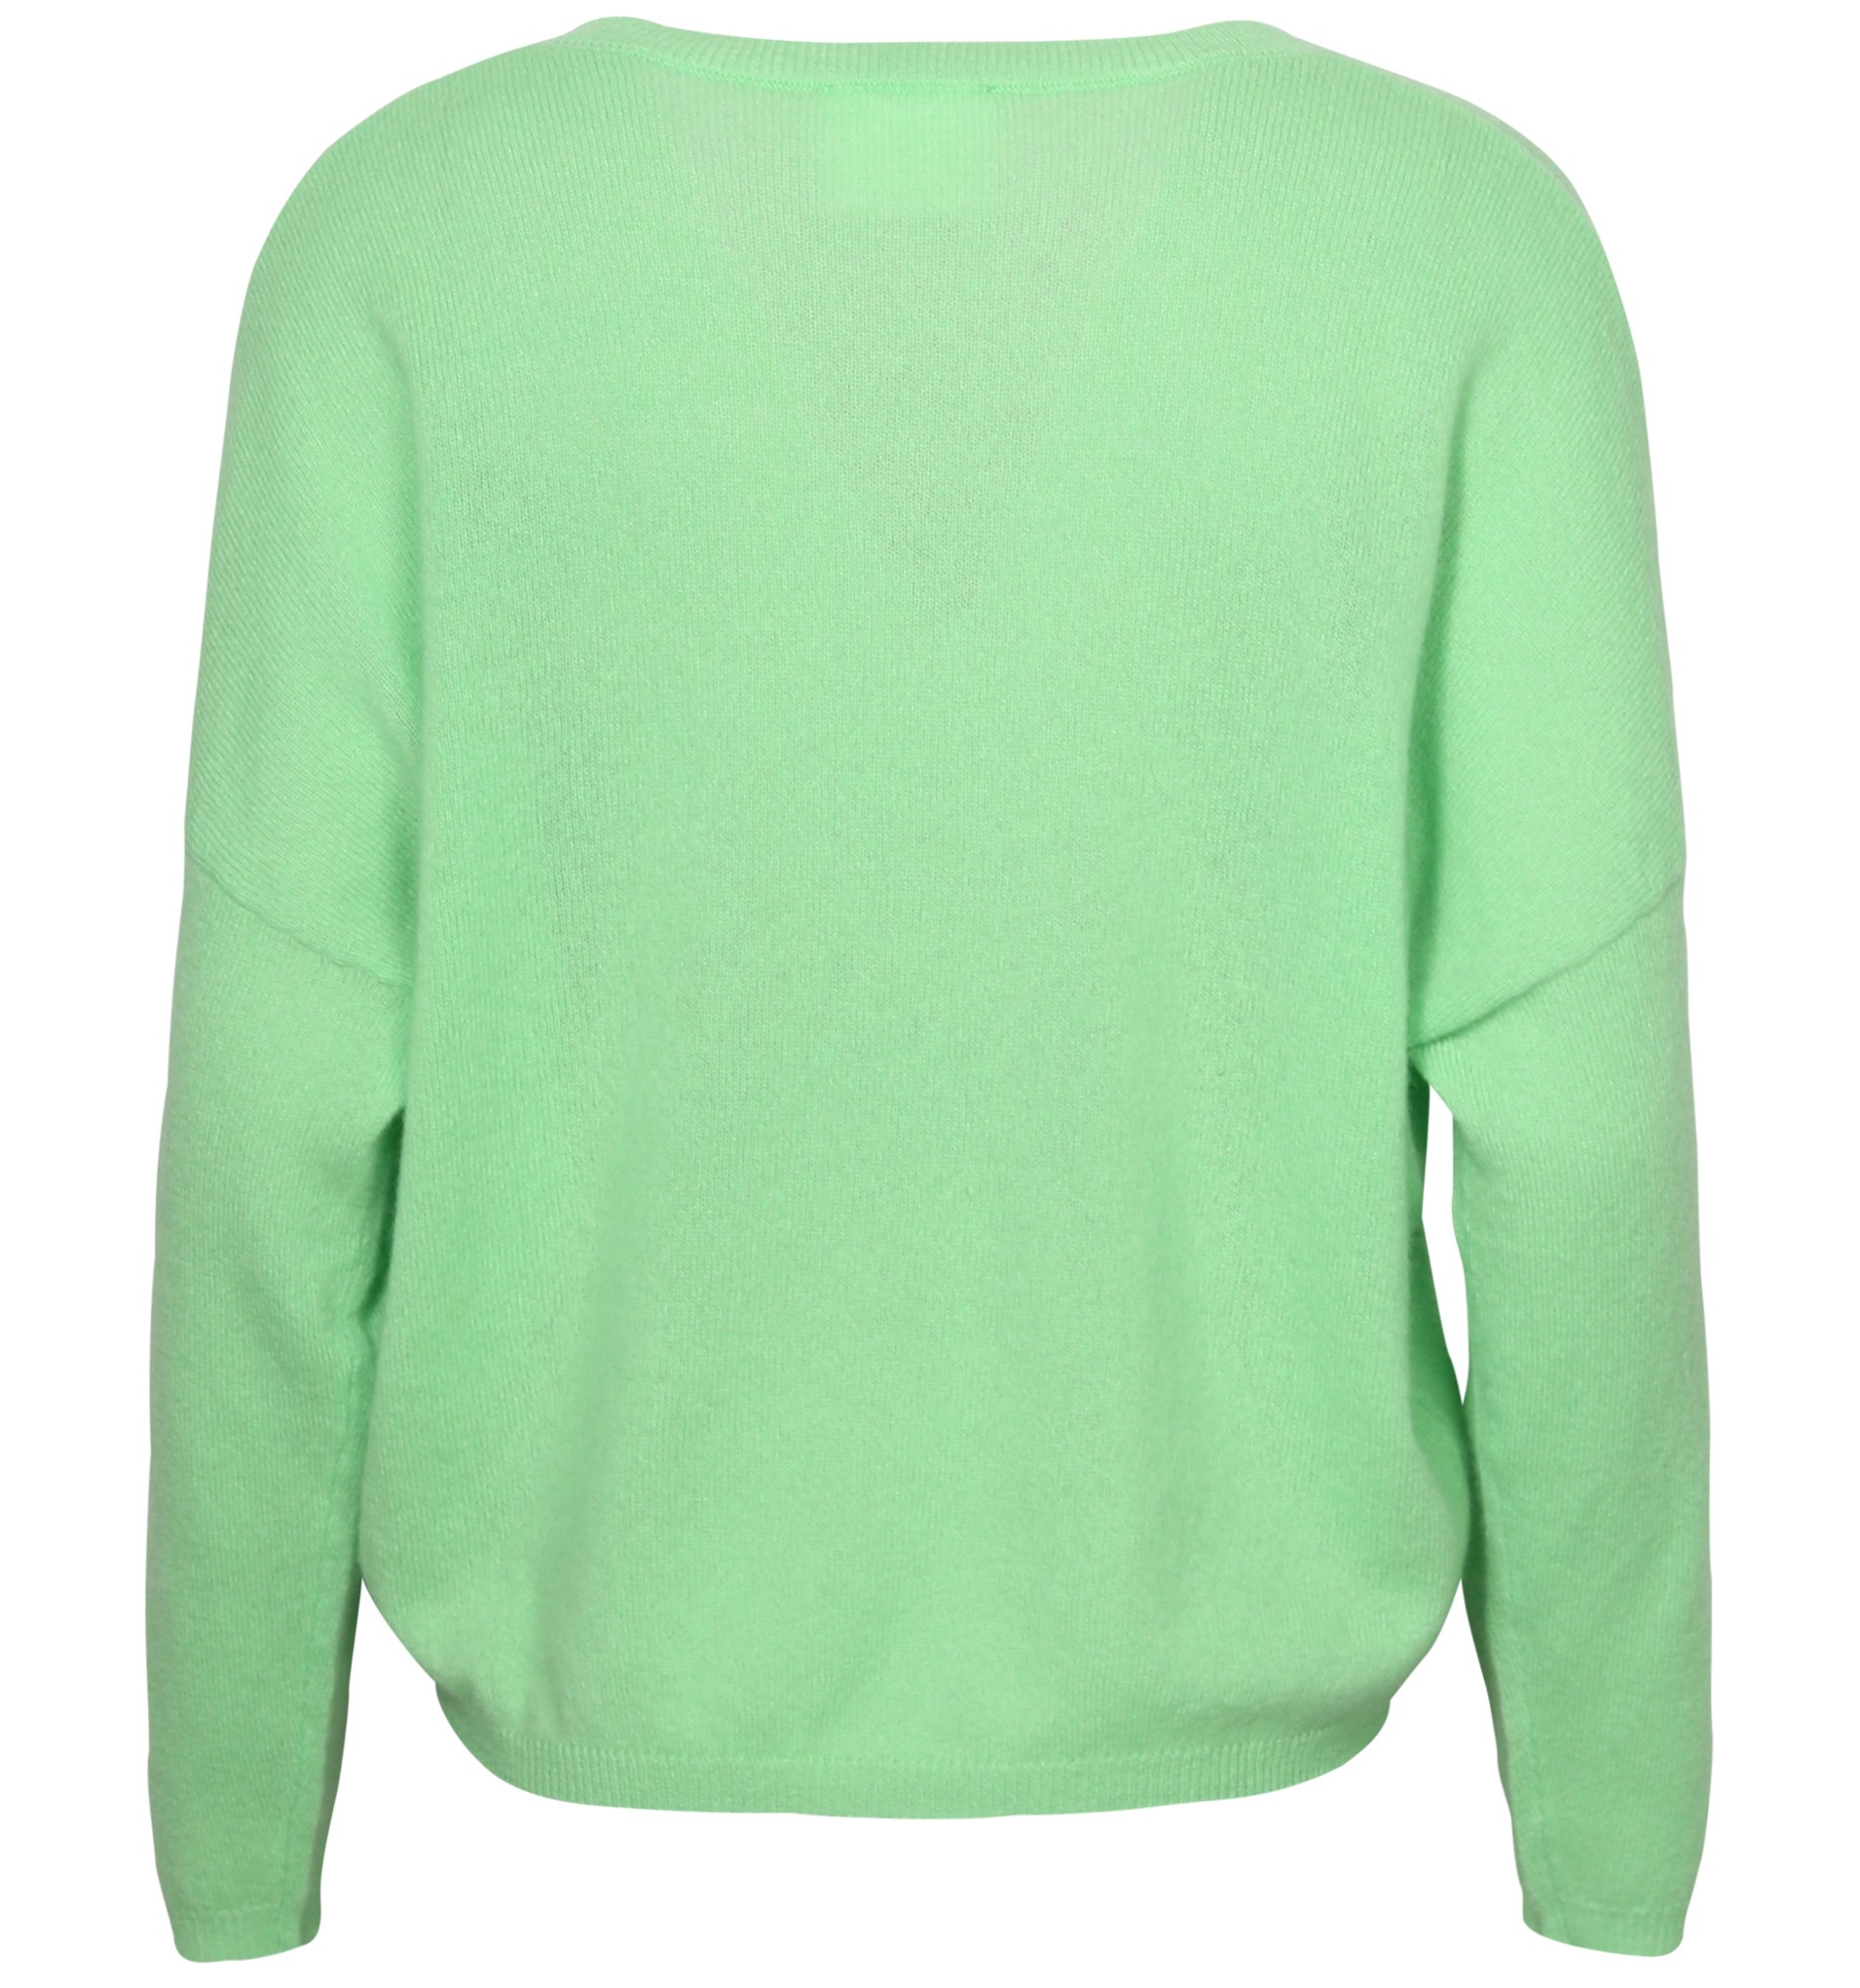 ABSOLUT CASHMERE V-Neck Sweater Alicia in Light Green XS